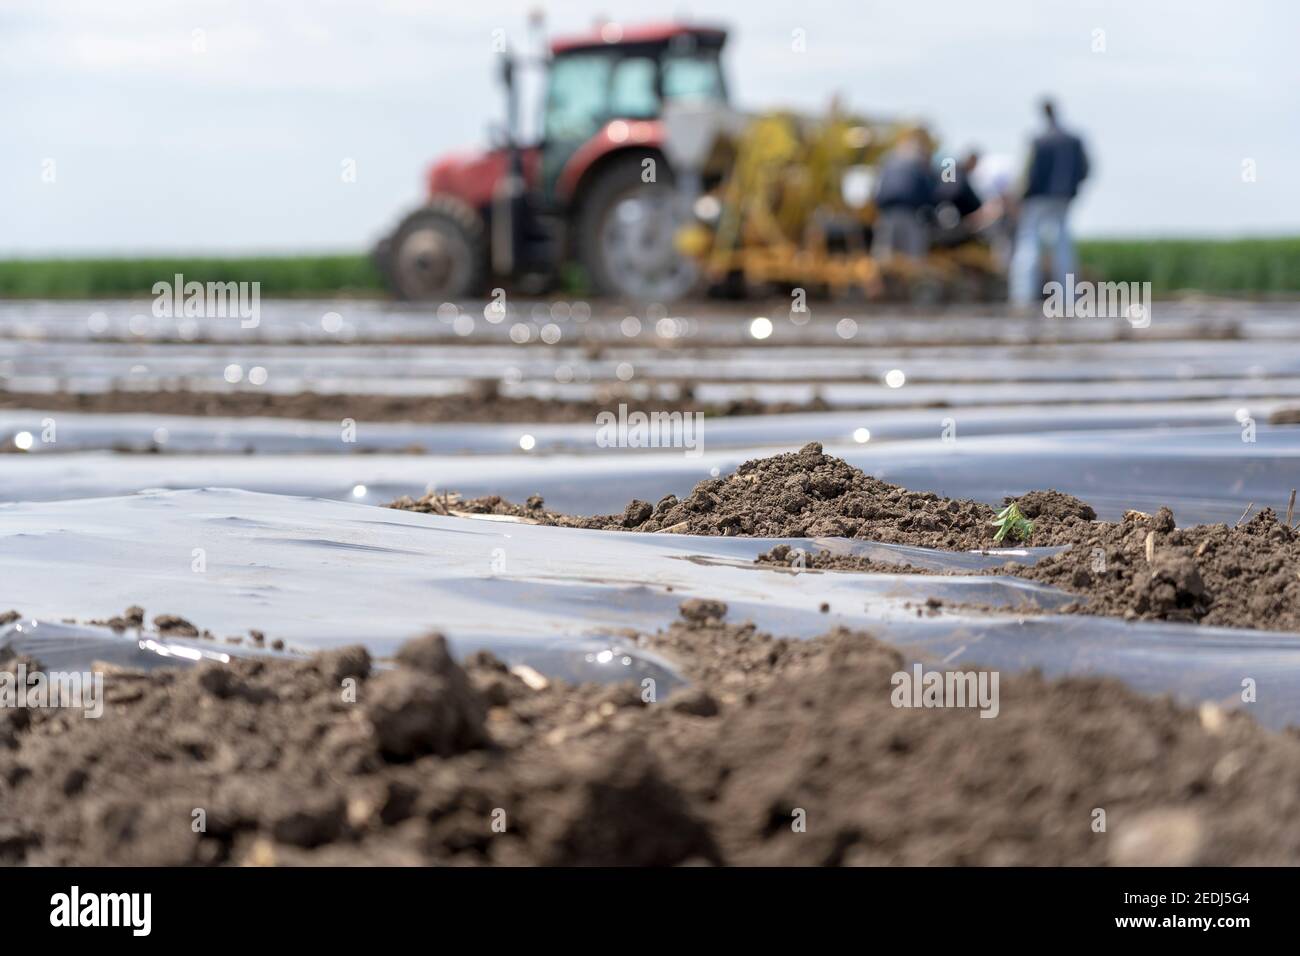 Farmer Installing Drip Tape Irrigation Under Plastic Mulch on a Vegetable Bed. Stock Photo